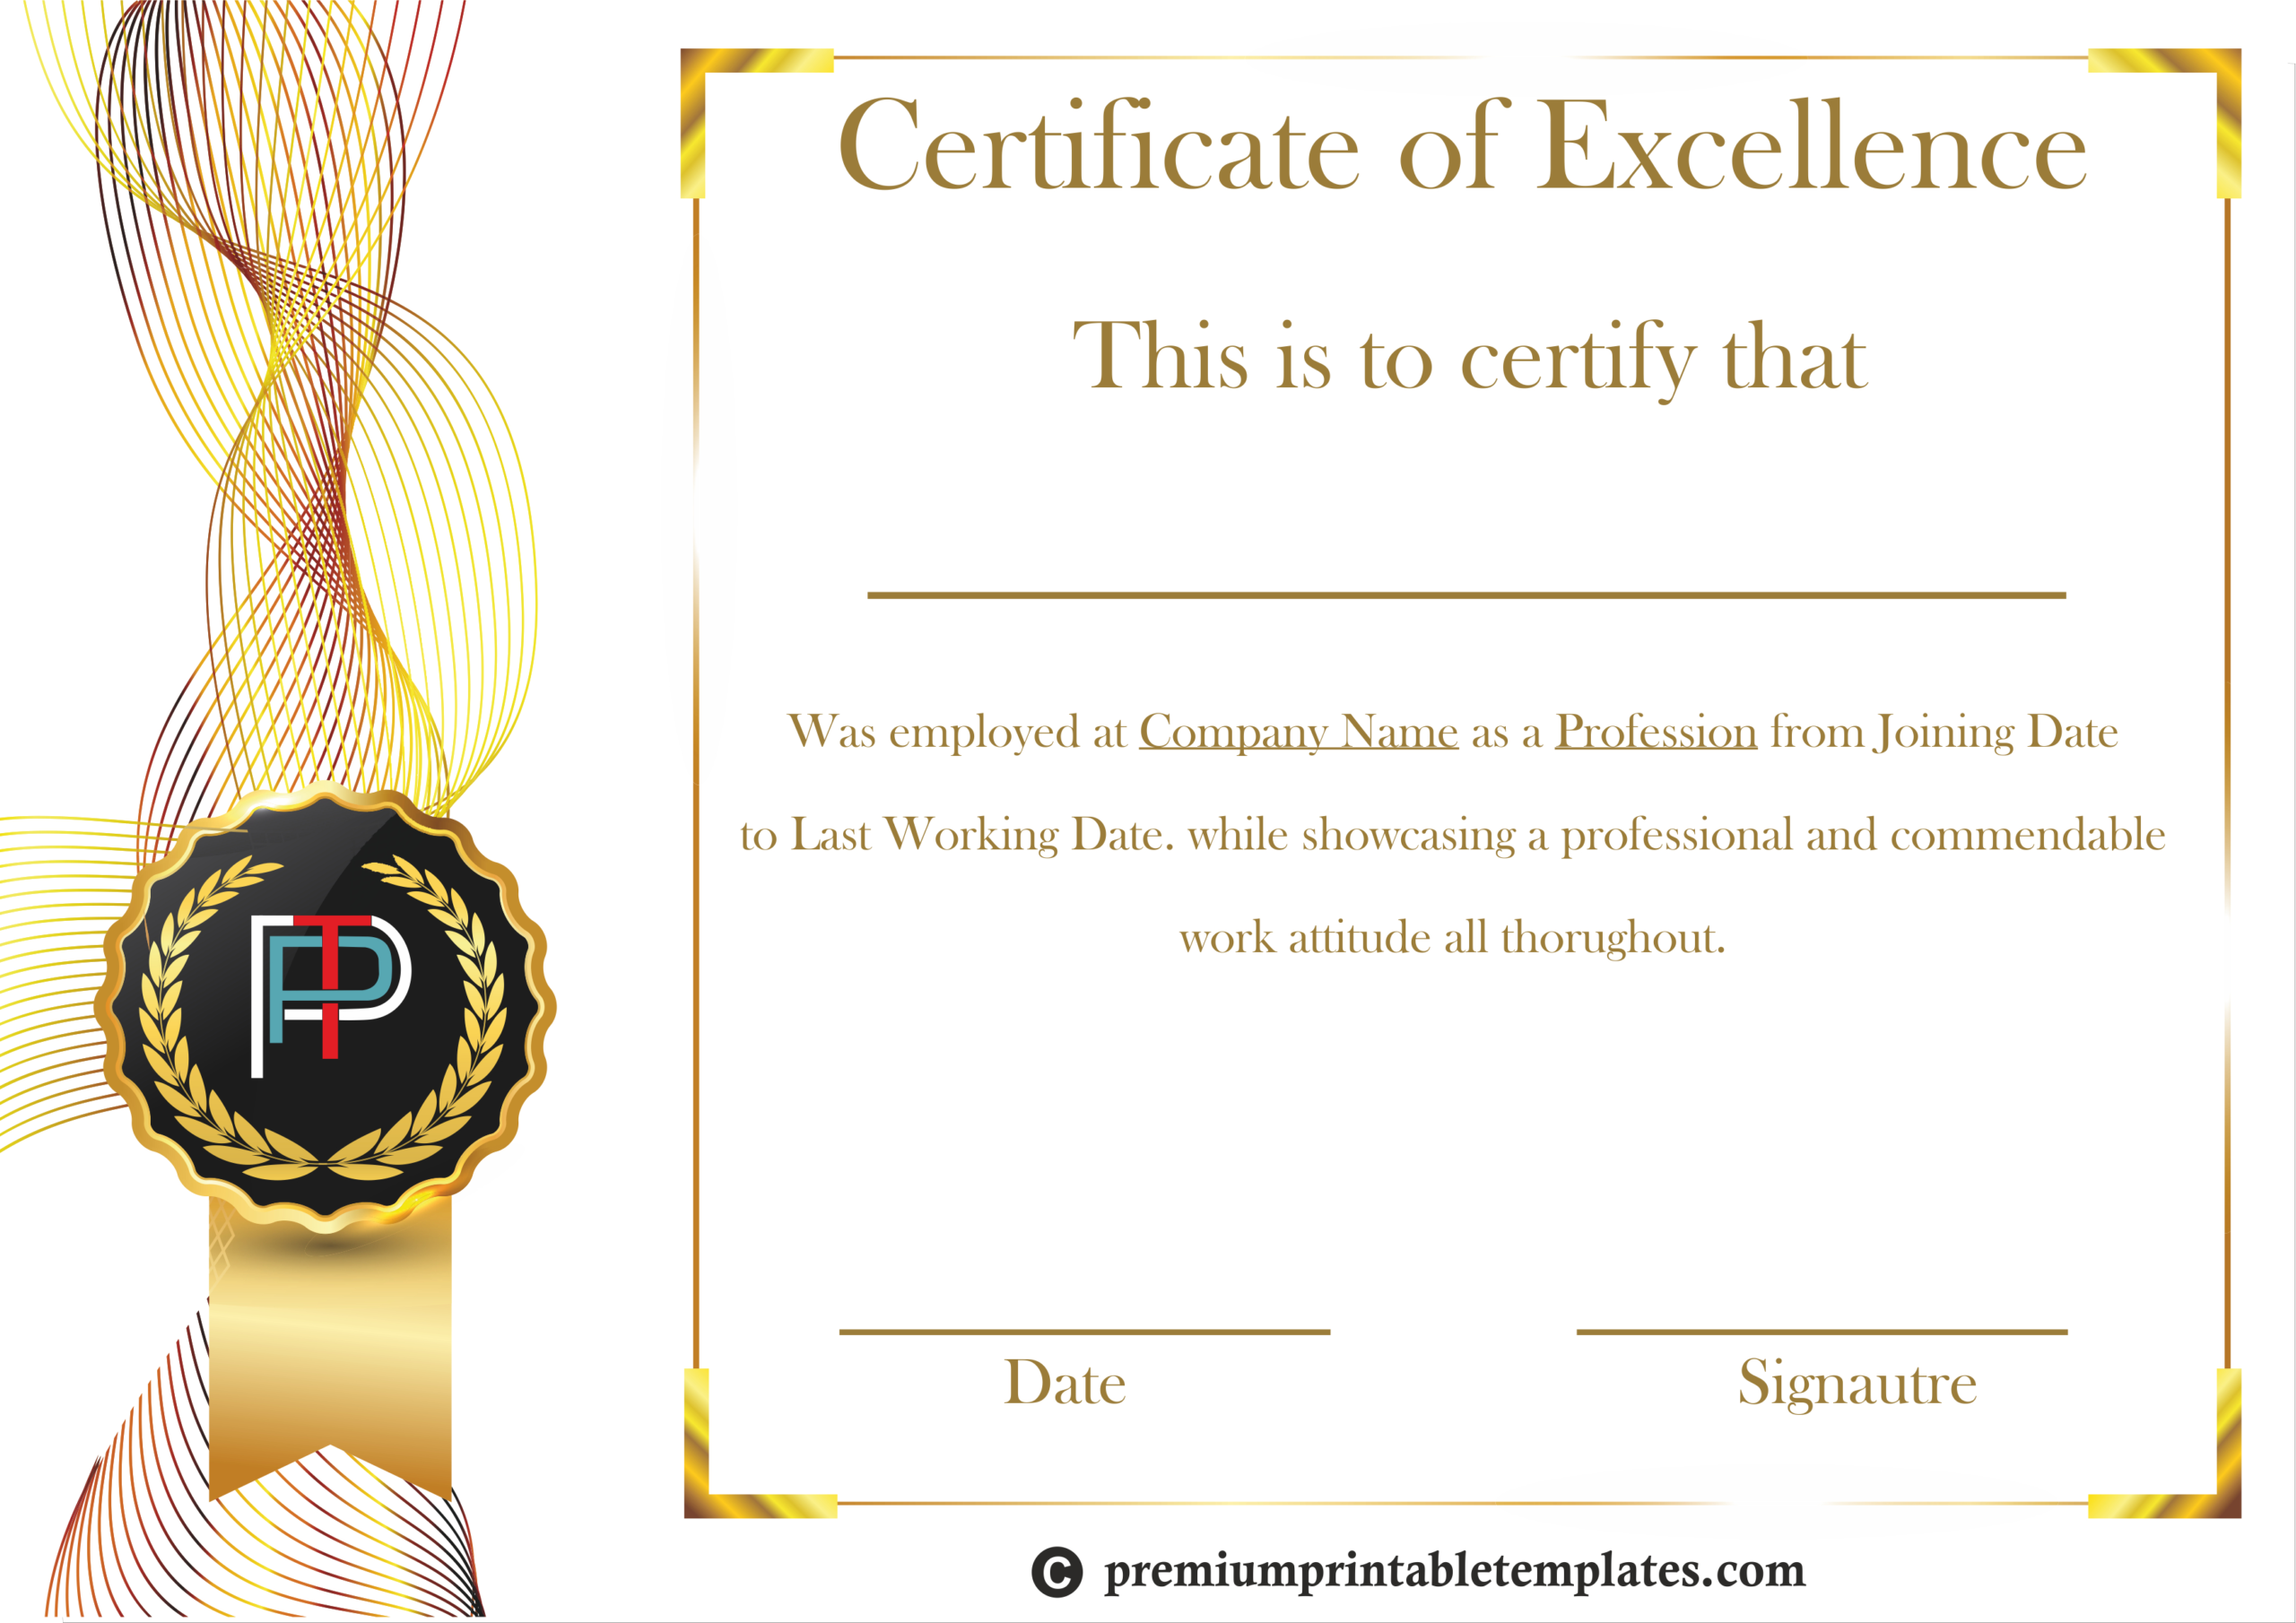 Certificate Of Excellence Template | Certificate Templates Within Best Performance Certificate Template